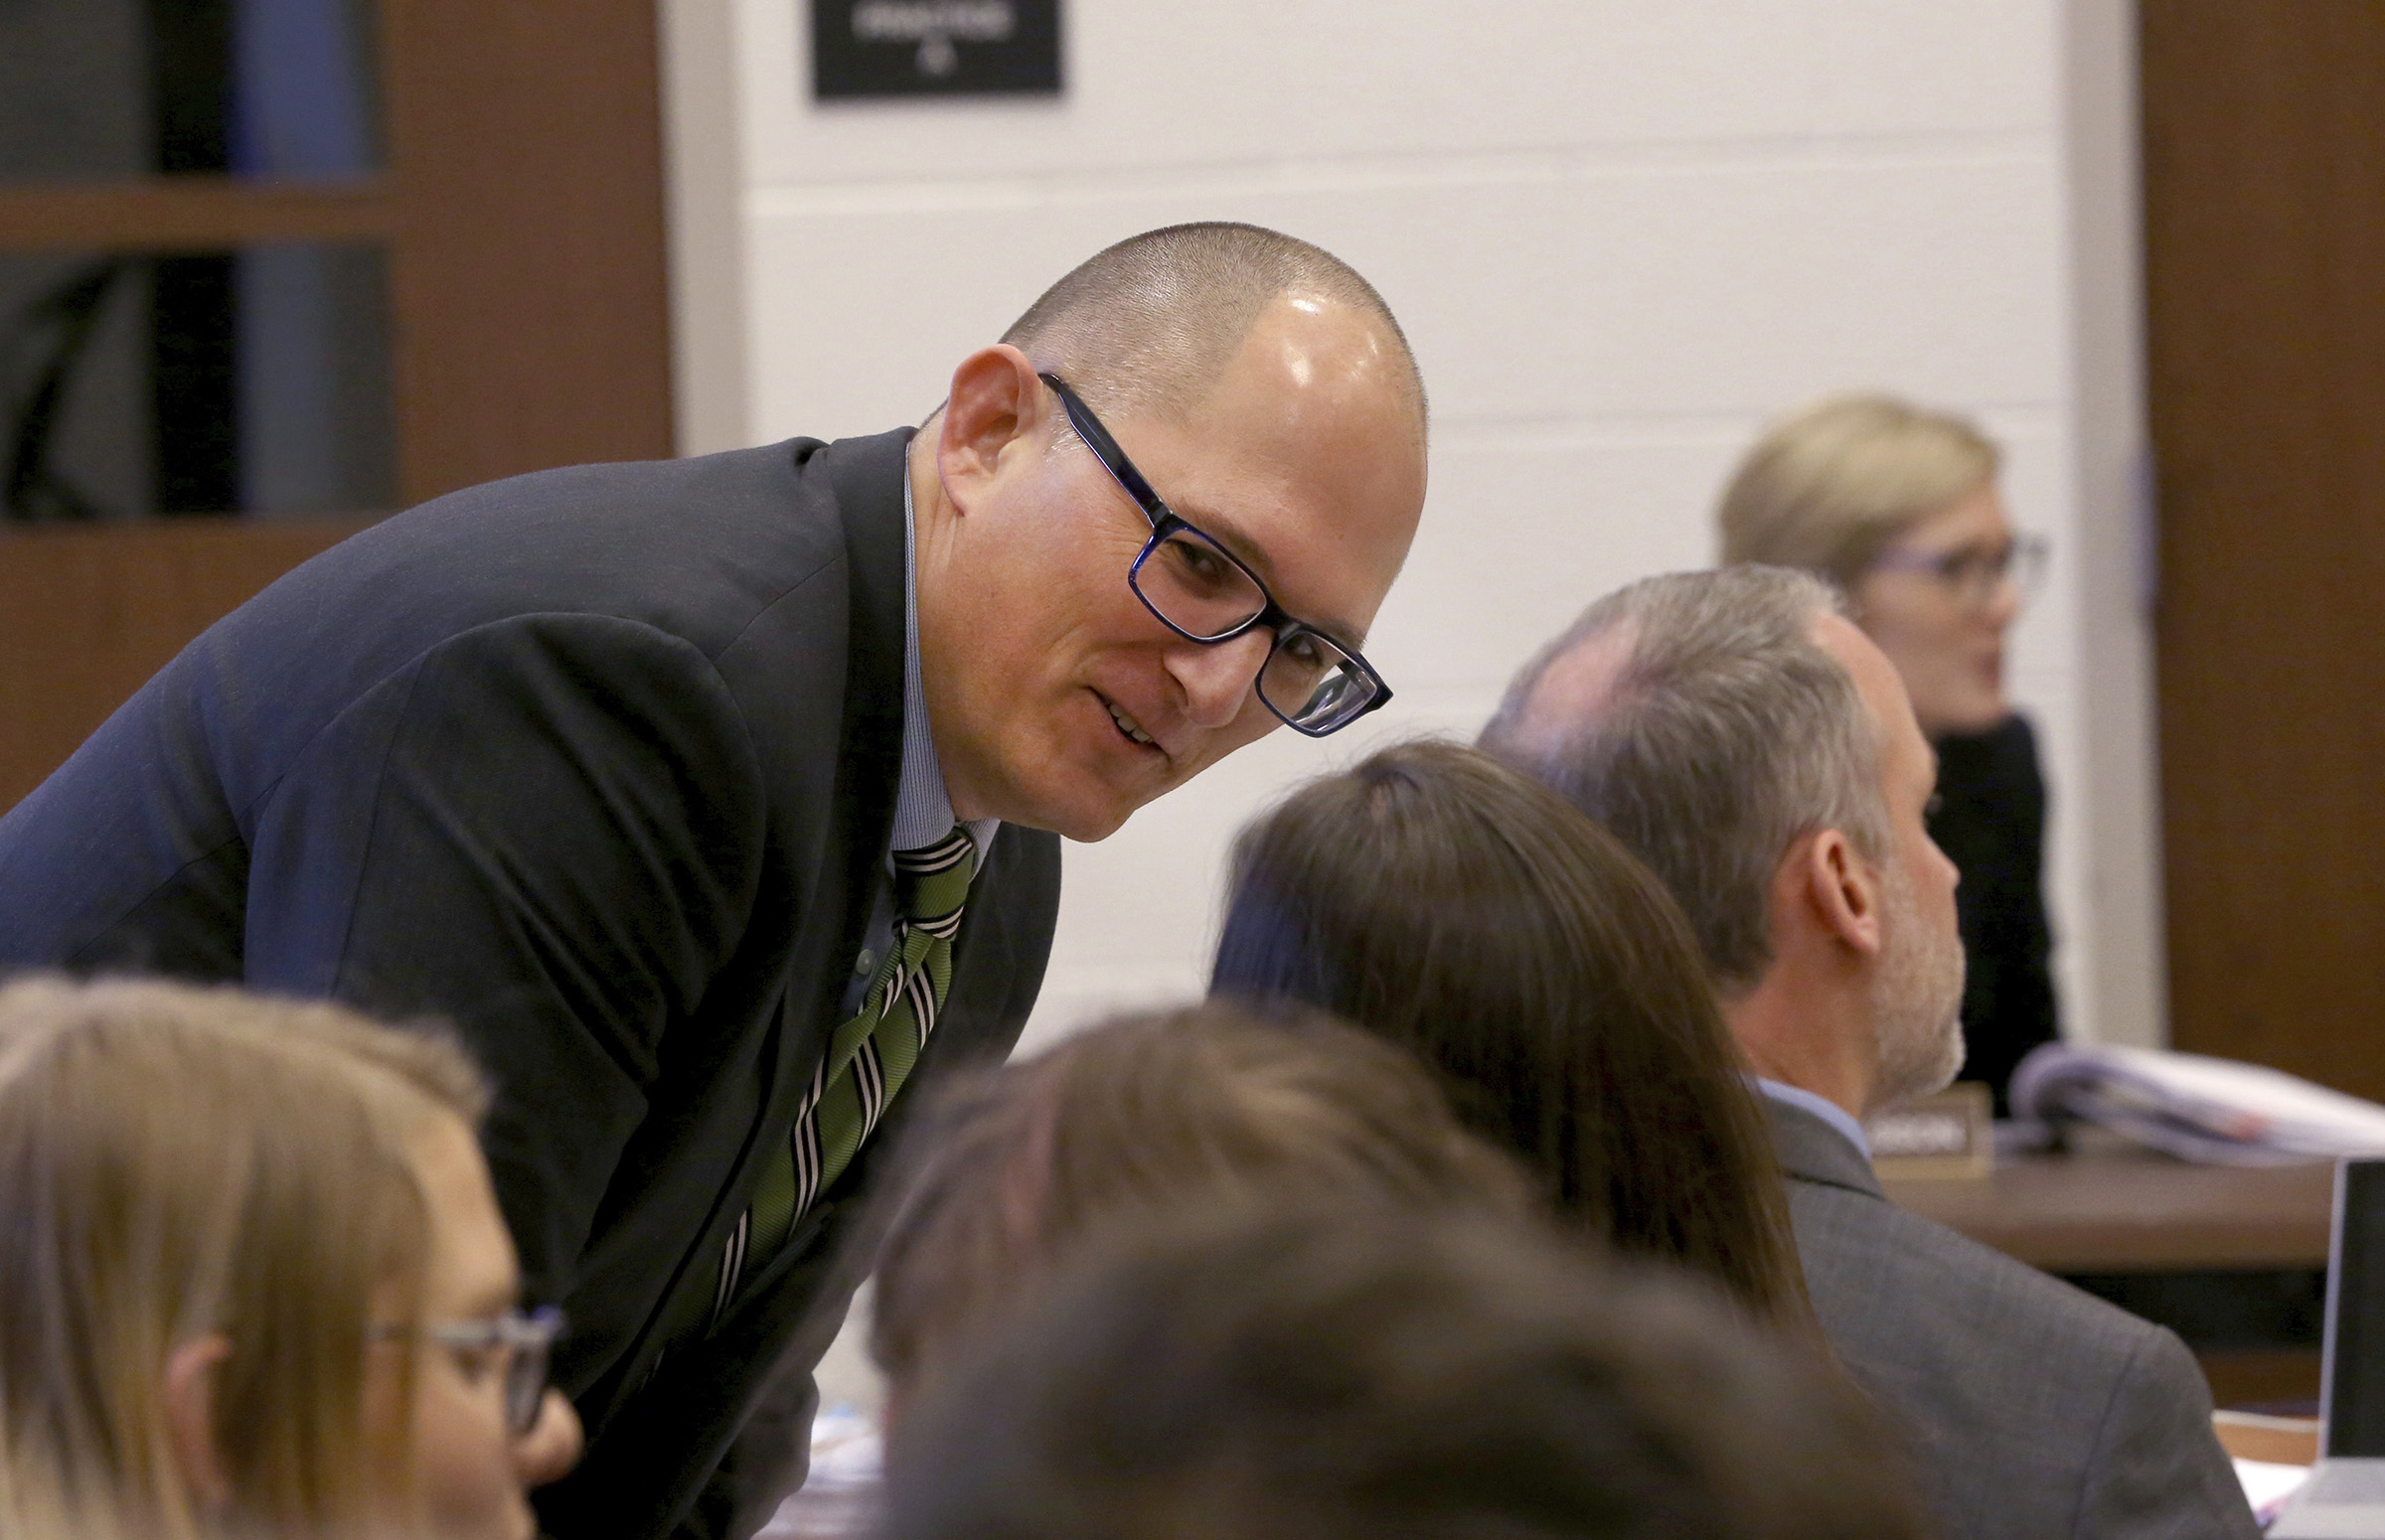 High school teacher Peter Vlaming chats at a West Point School Board hearing in West Point, Virginia on Dec. 6, 2018. (Shelby Lum—AP)